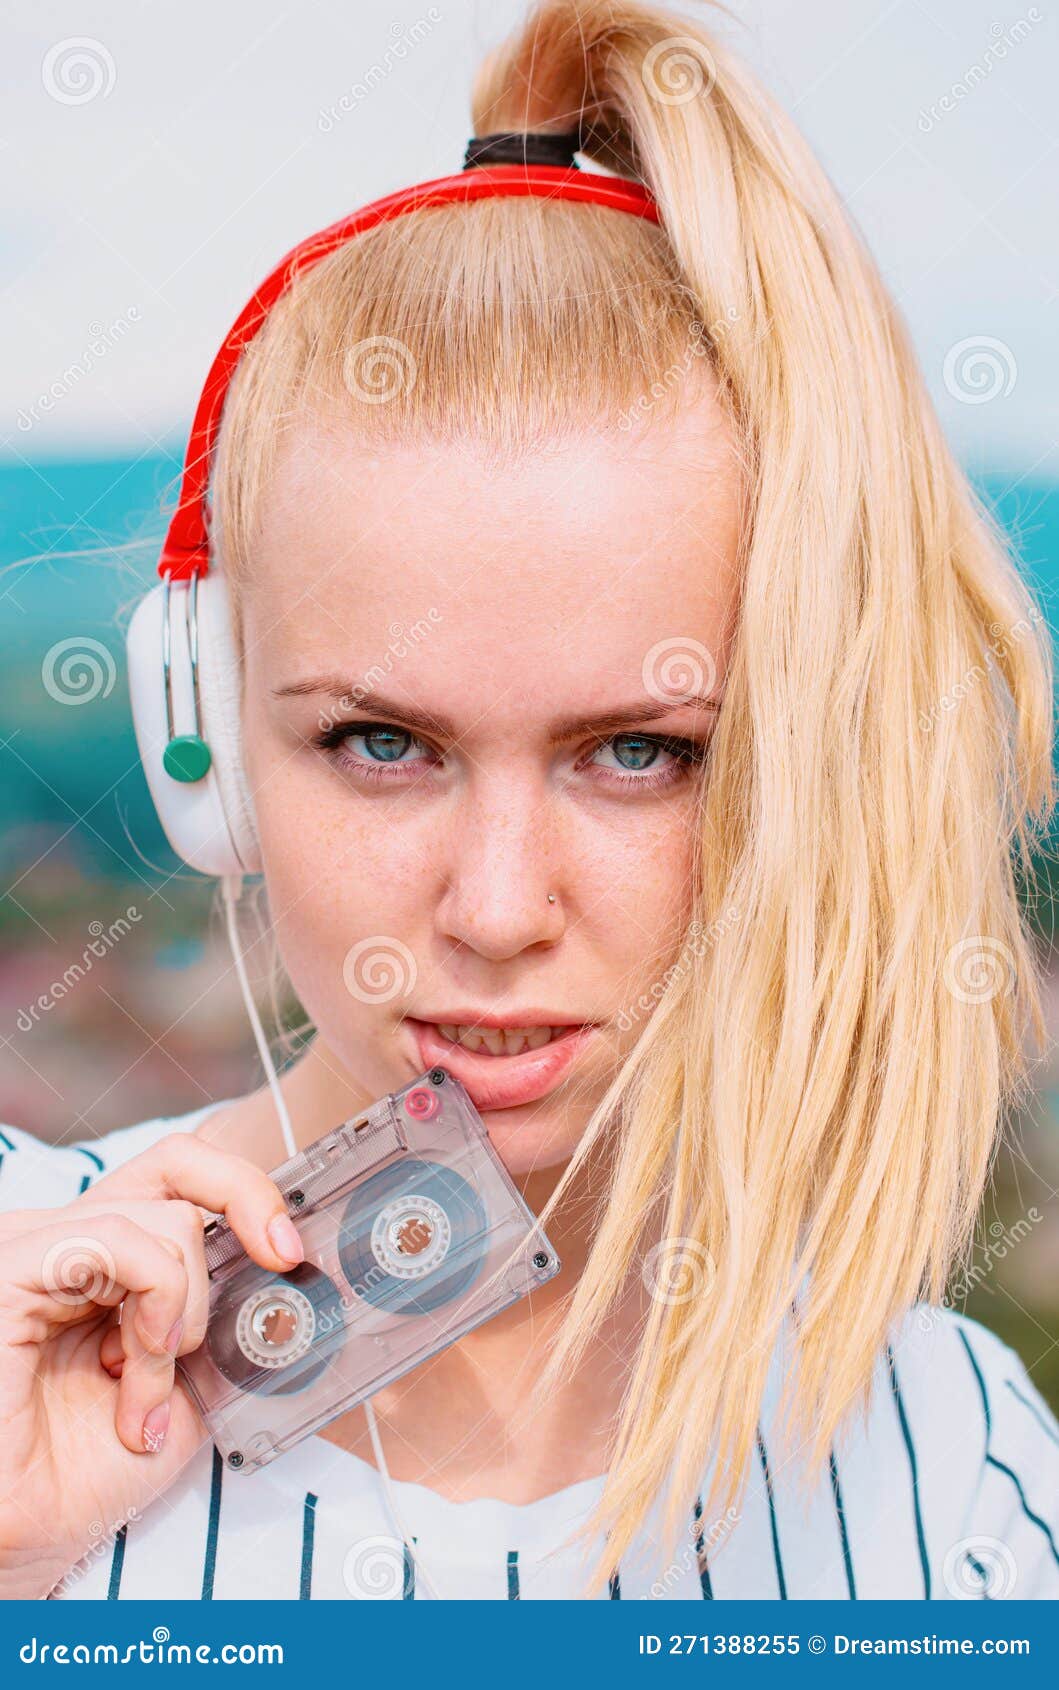 Woman Listening Music With Cassette And Headphones Emotional Portrait